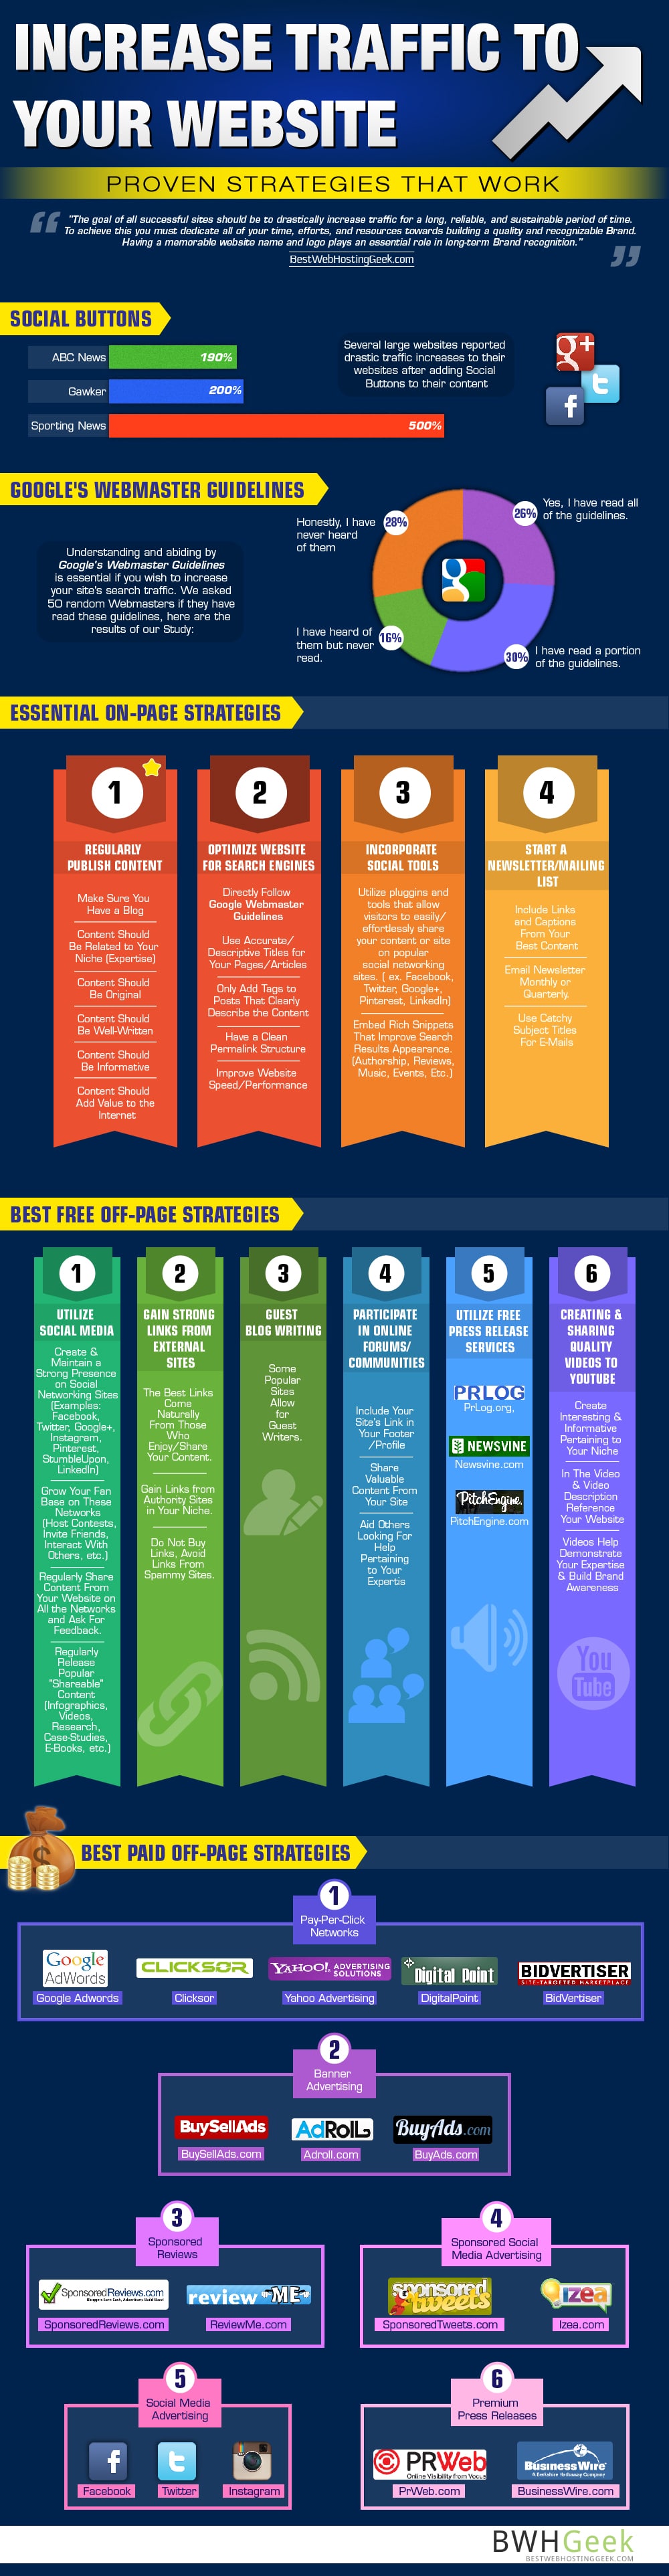 Top Strategies To Drive More Traffic To Your Website [Infographic]